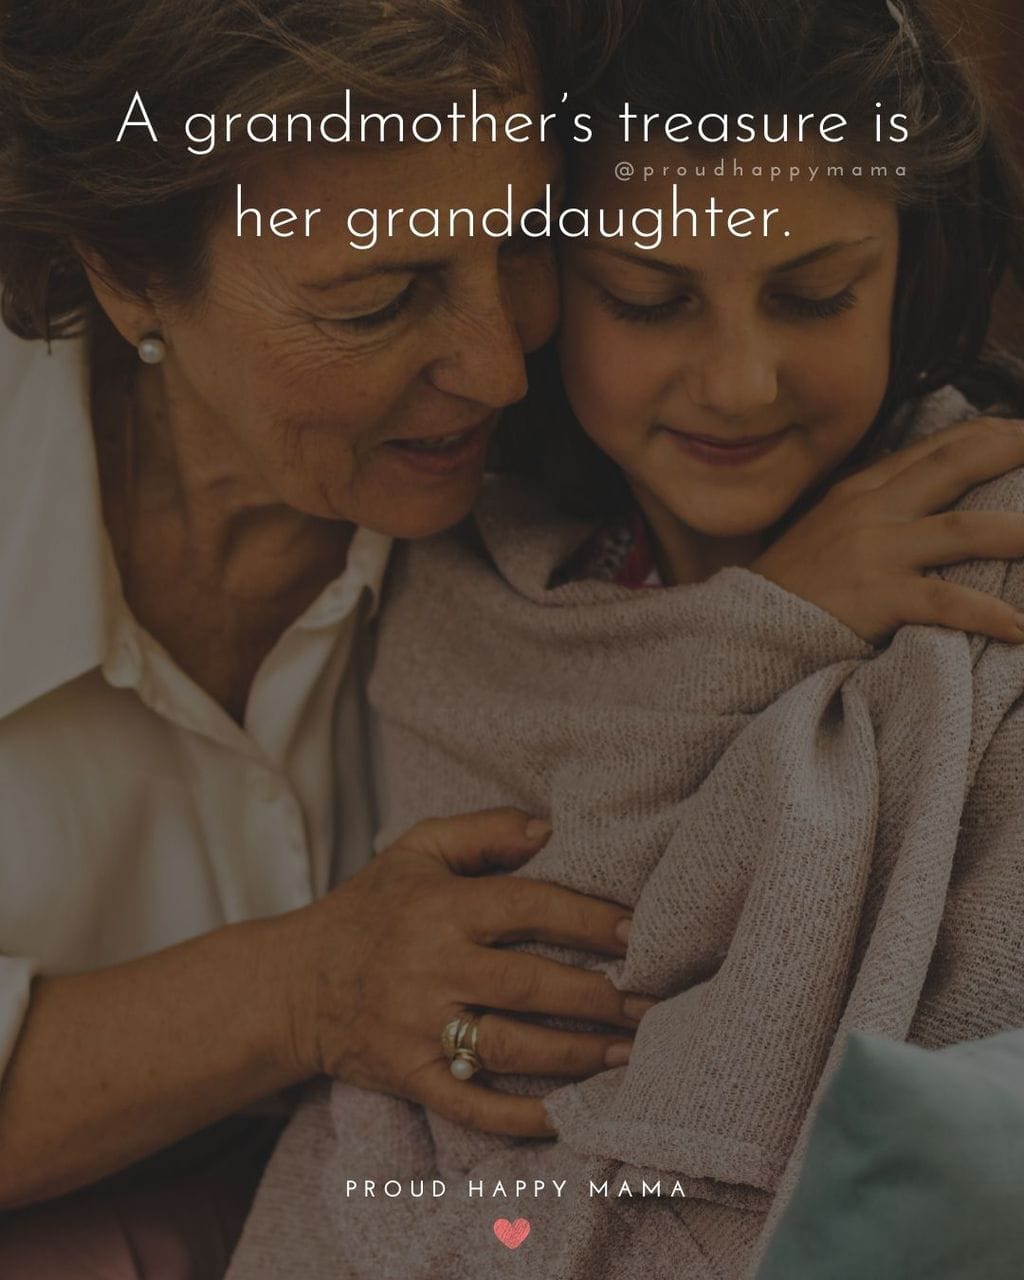 Granddaughter Quotes - A grandmother’s treasure is her granddaughter.